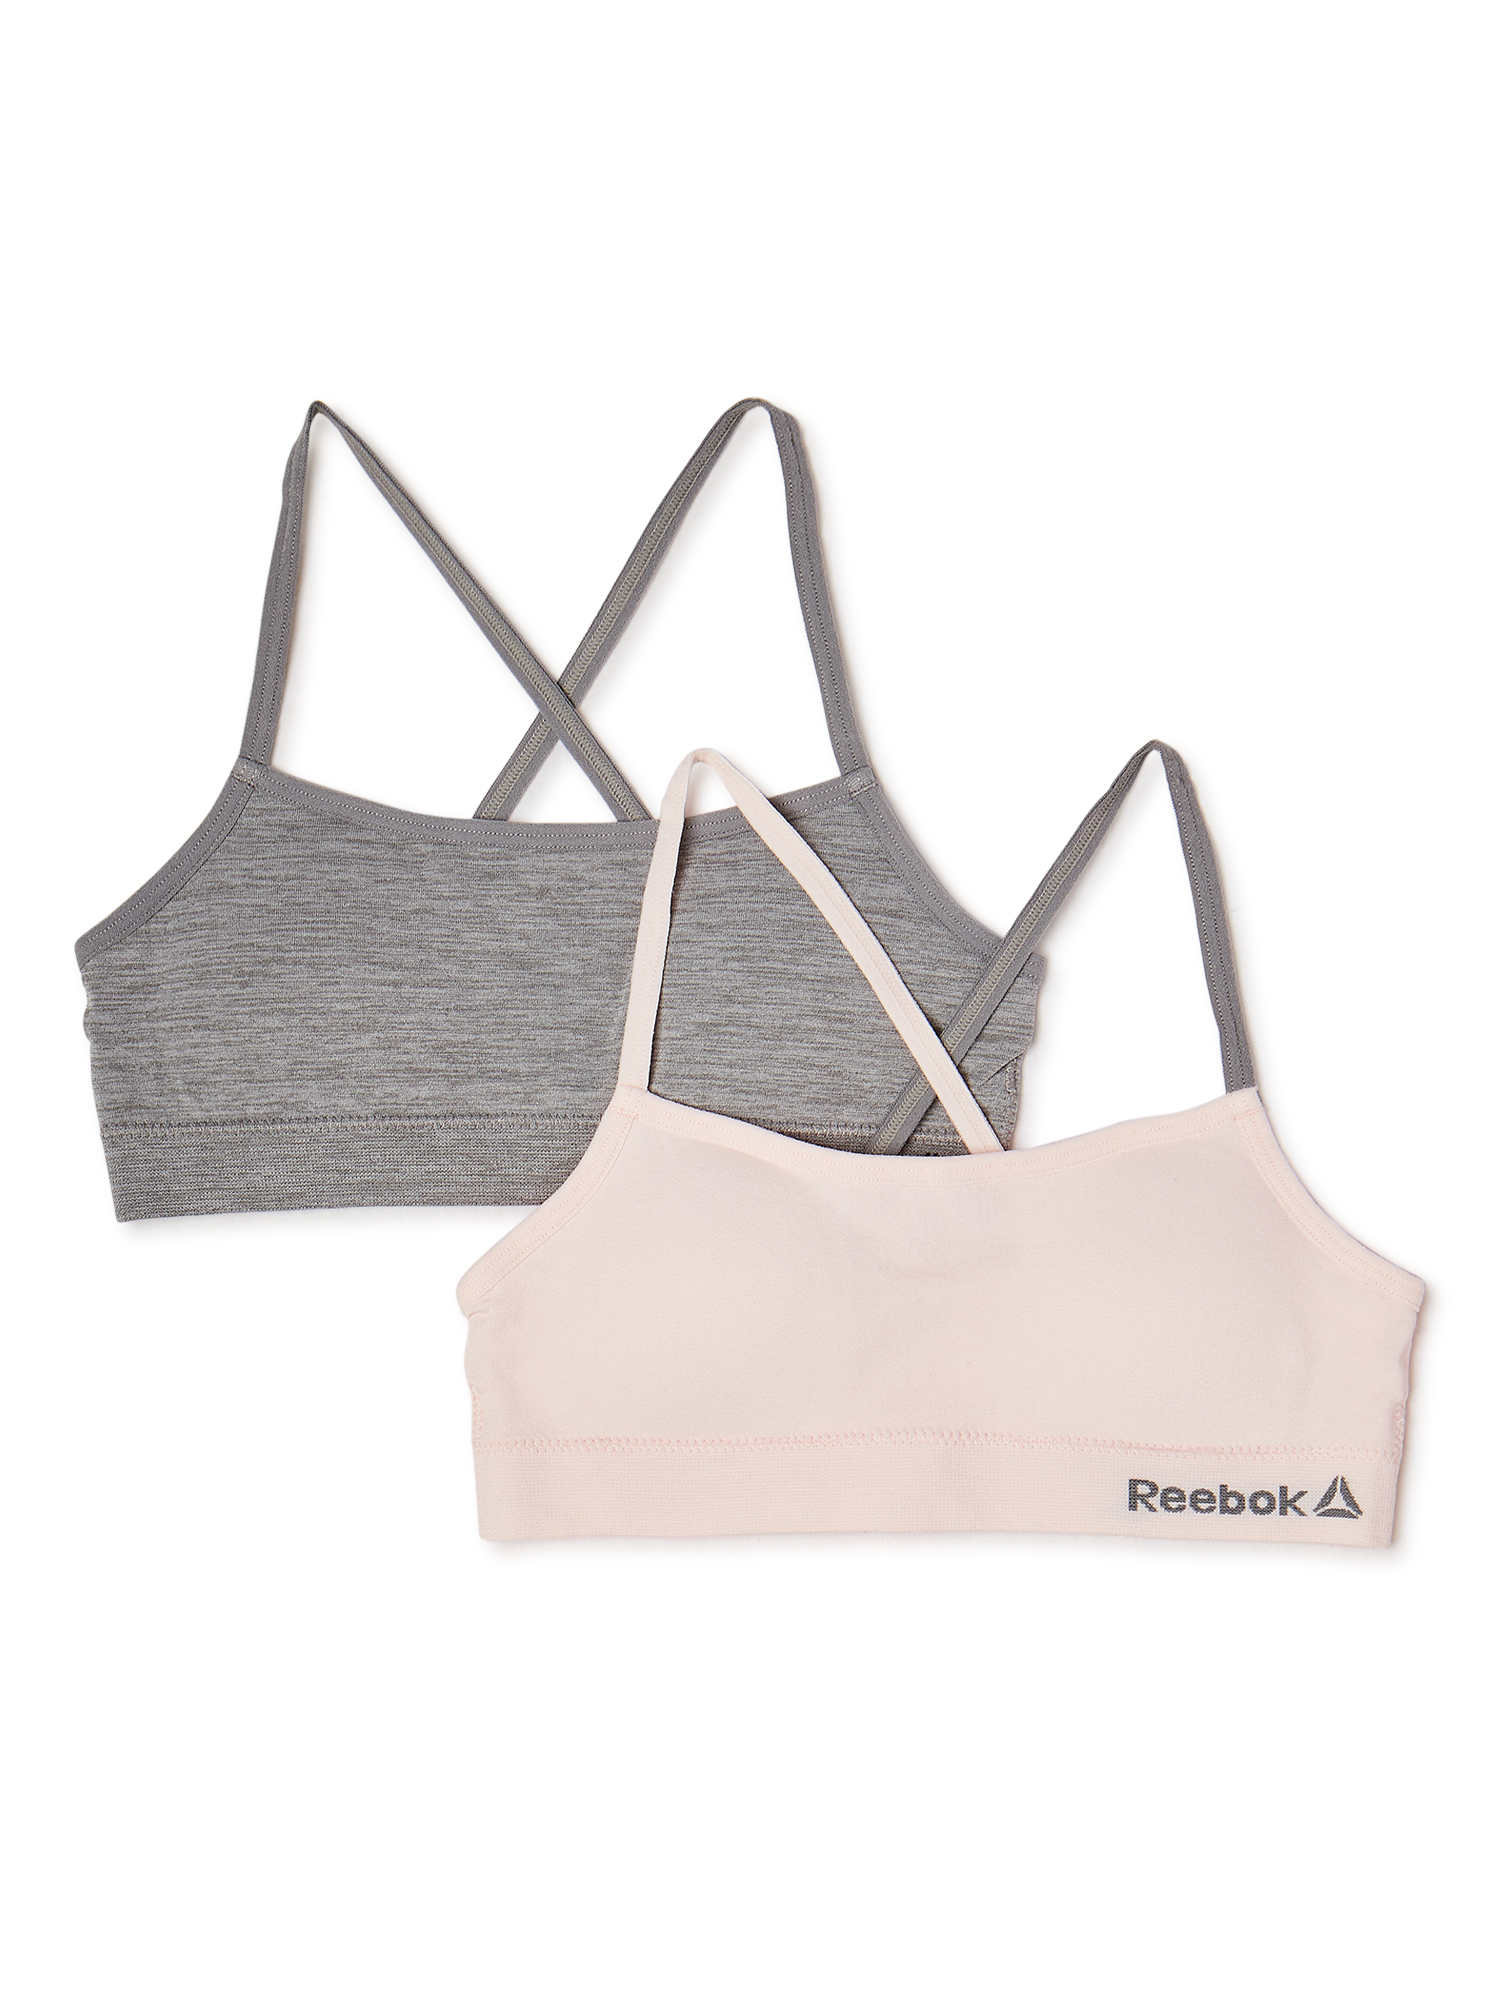 Reebok Girl's Seamless Strappy Bralettes, 2-Pack - image 1 of 4